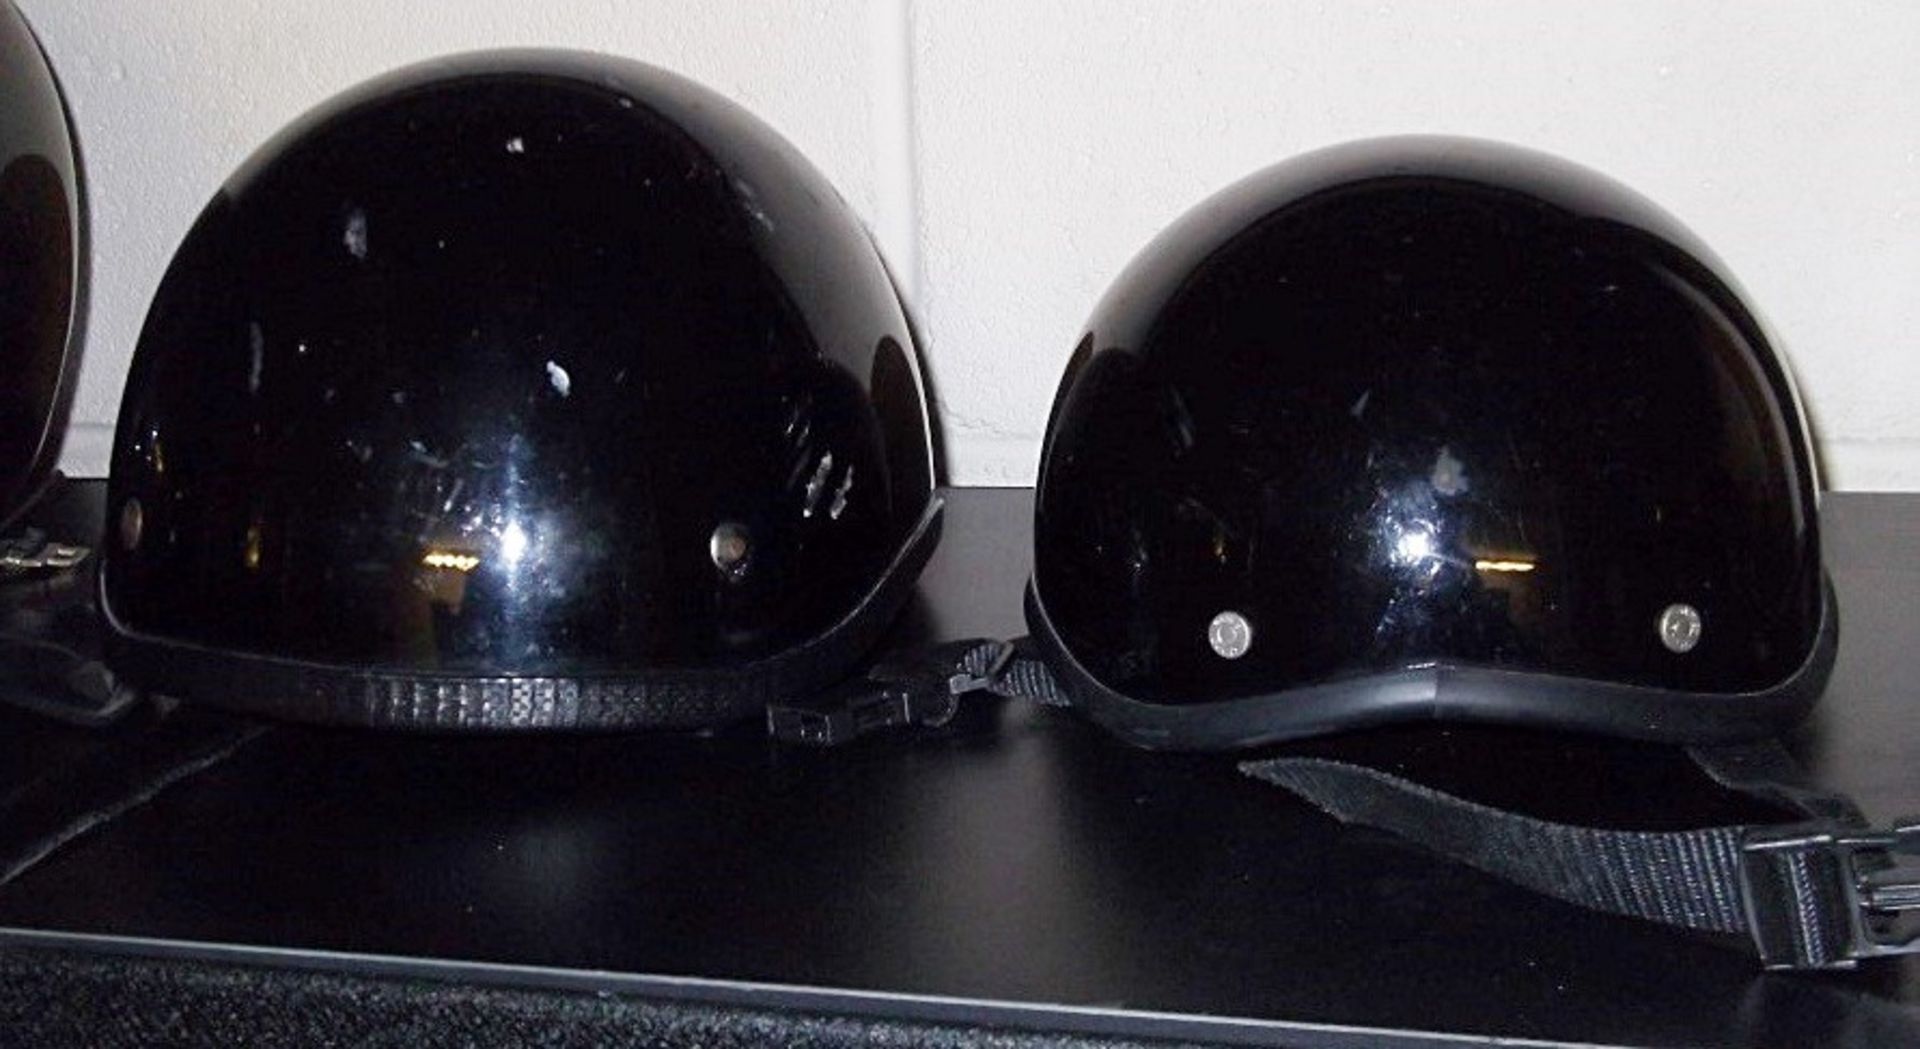 2 x Motorcycle Helmets - Both Medium Adult - Pre-loved, In Good Condition - Includes 1 x Standard - Image 4 of 6